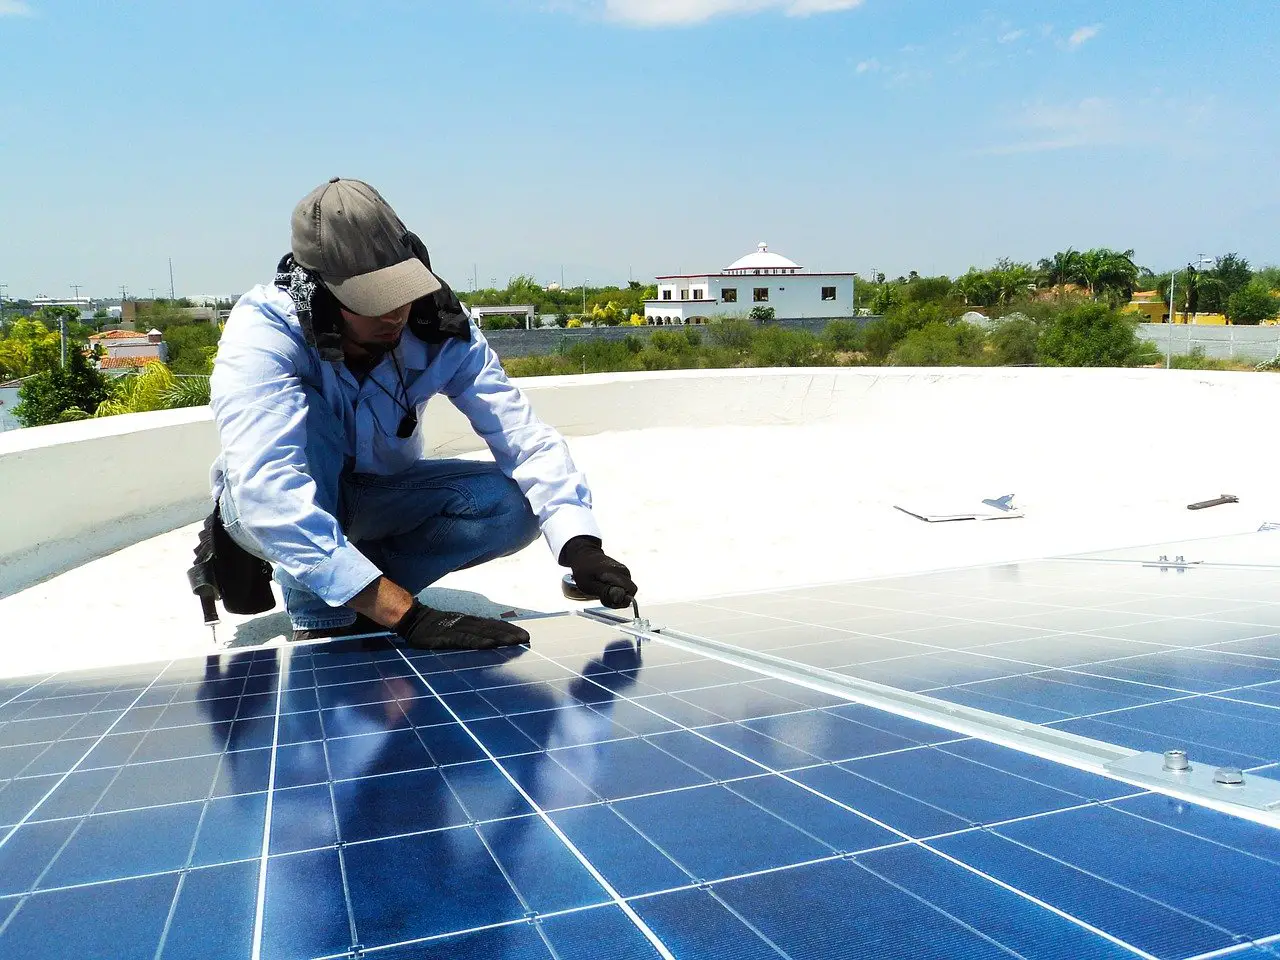 Are Solar Panels A Good Investment? – 5 Solid Reasons Why Solar May Not Be For You